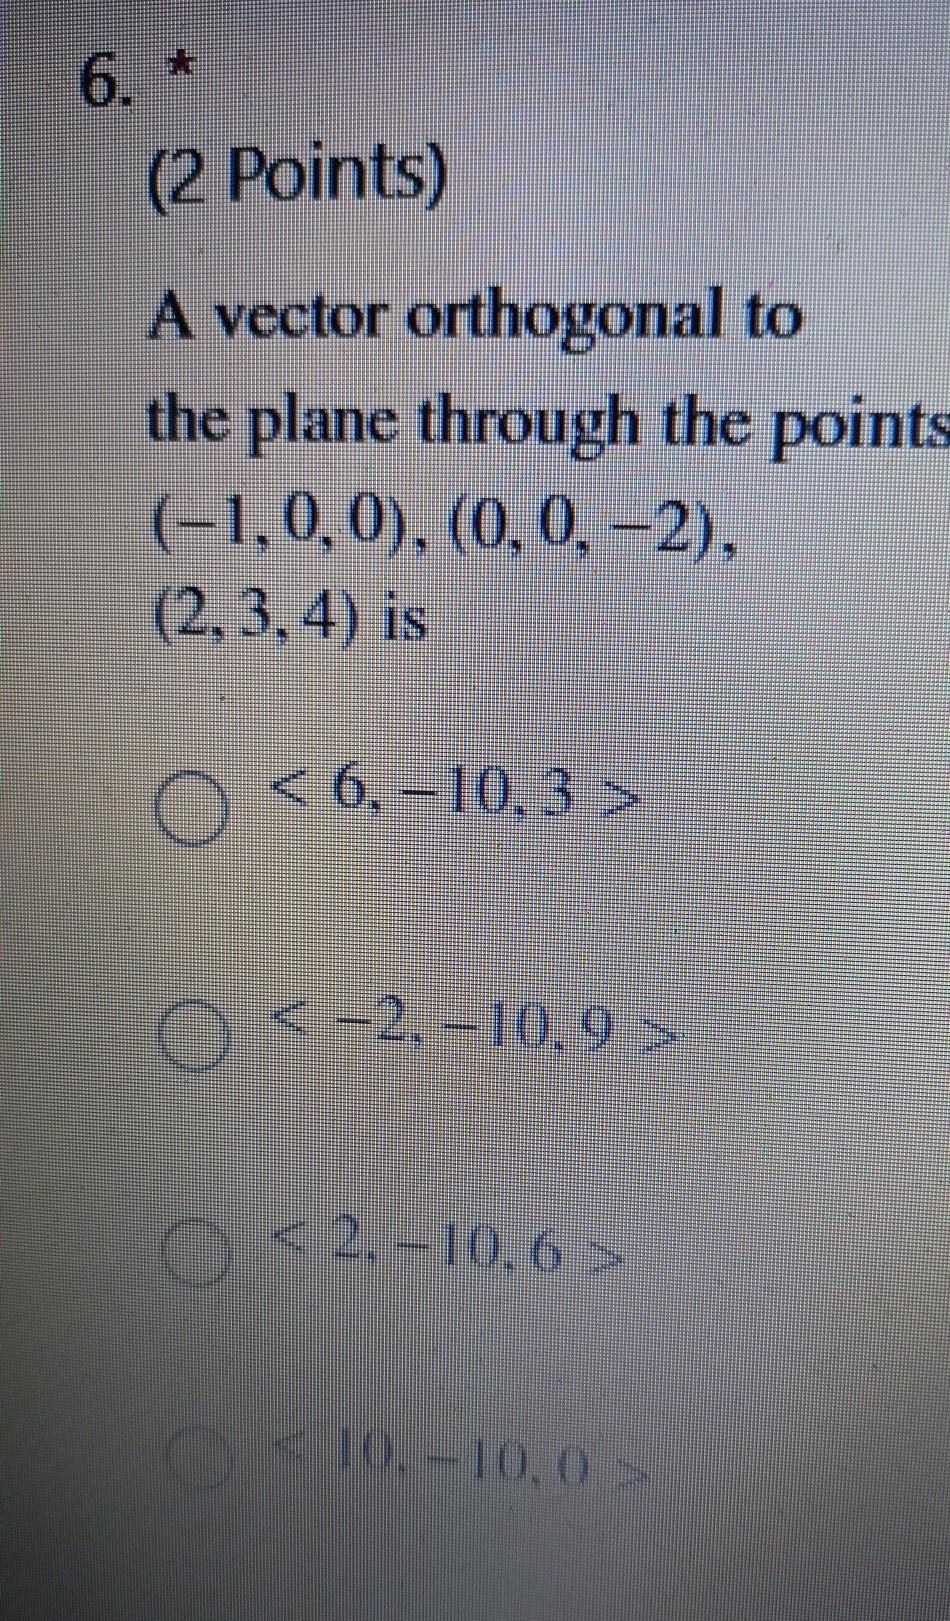 6 2 Points A Vector Orthogonal To The Plane Through The Points 1 0 0 0 0 2 2 3 4 Is O 6 10 3 0 2 1